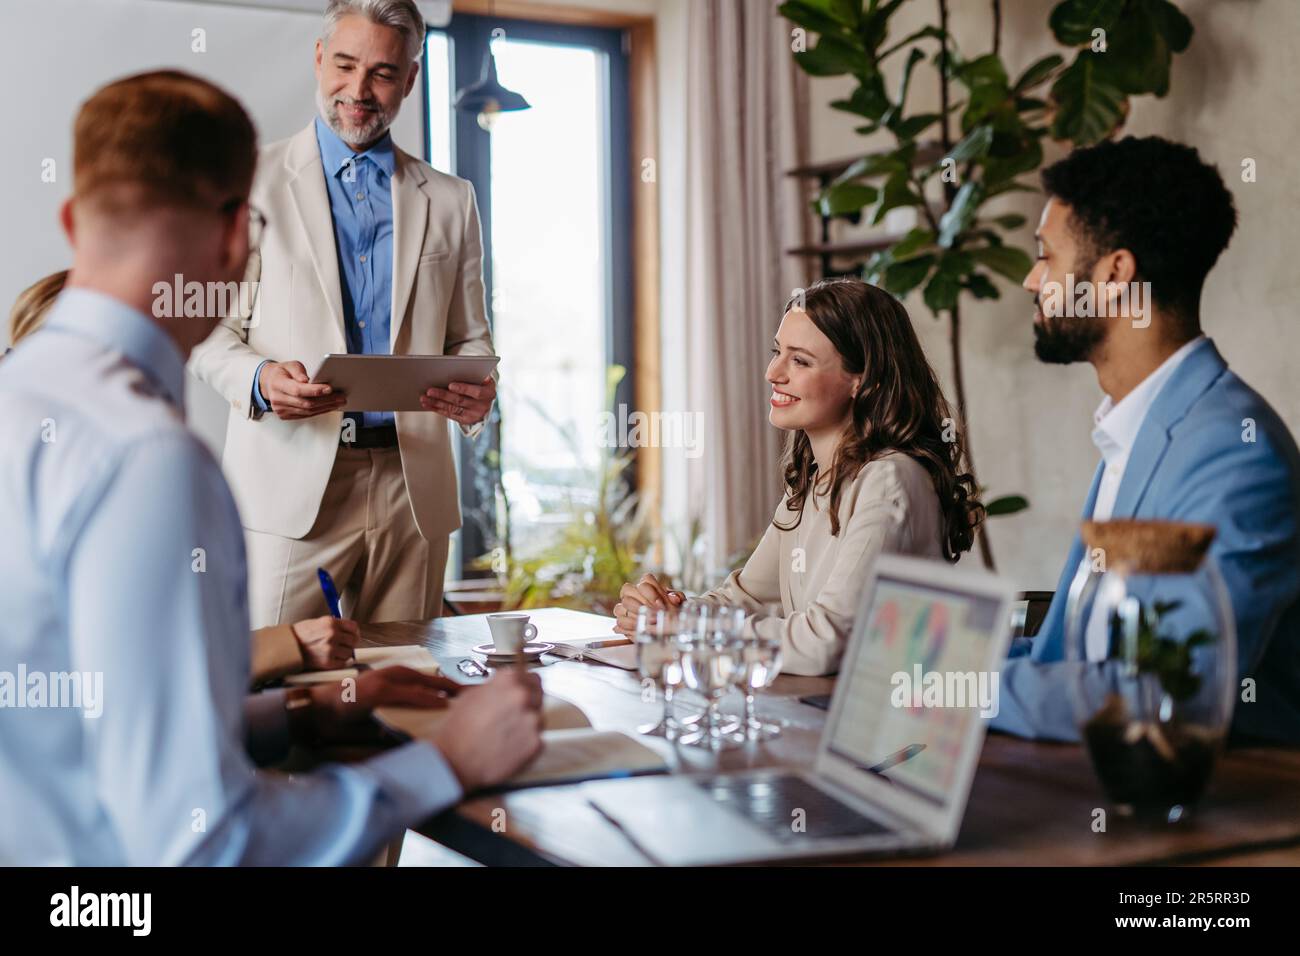 Mature businessman giving a presentation in a business meeting. Stock Photo